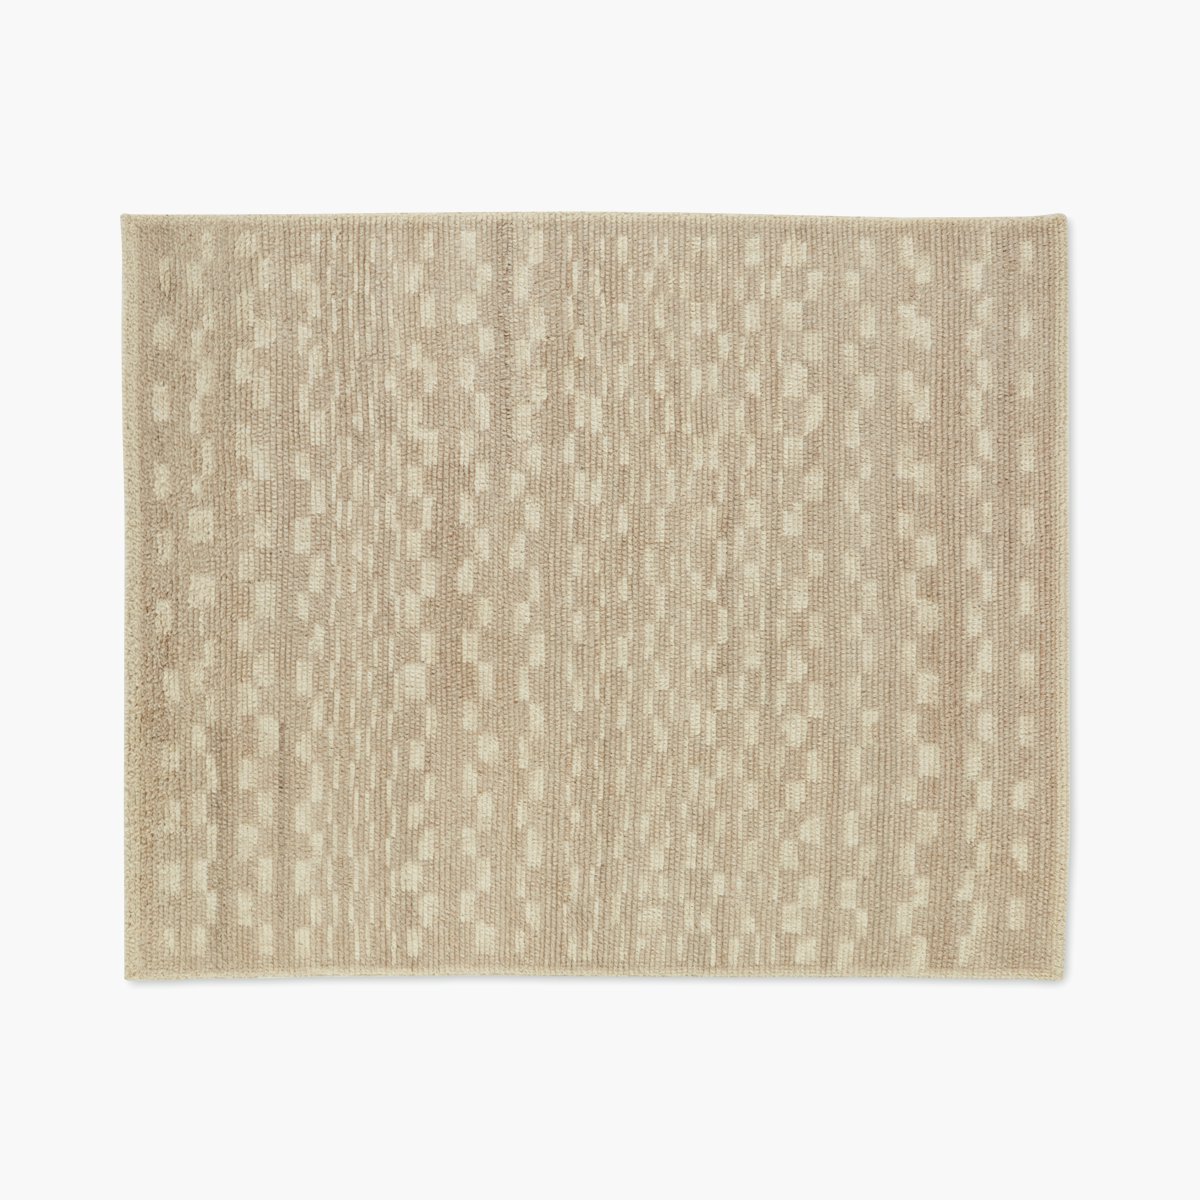 Marl Handwoven Moroccan Wool Rug Outlet